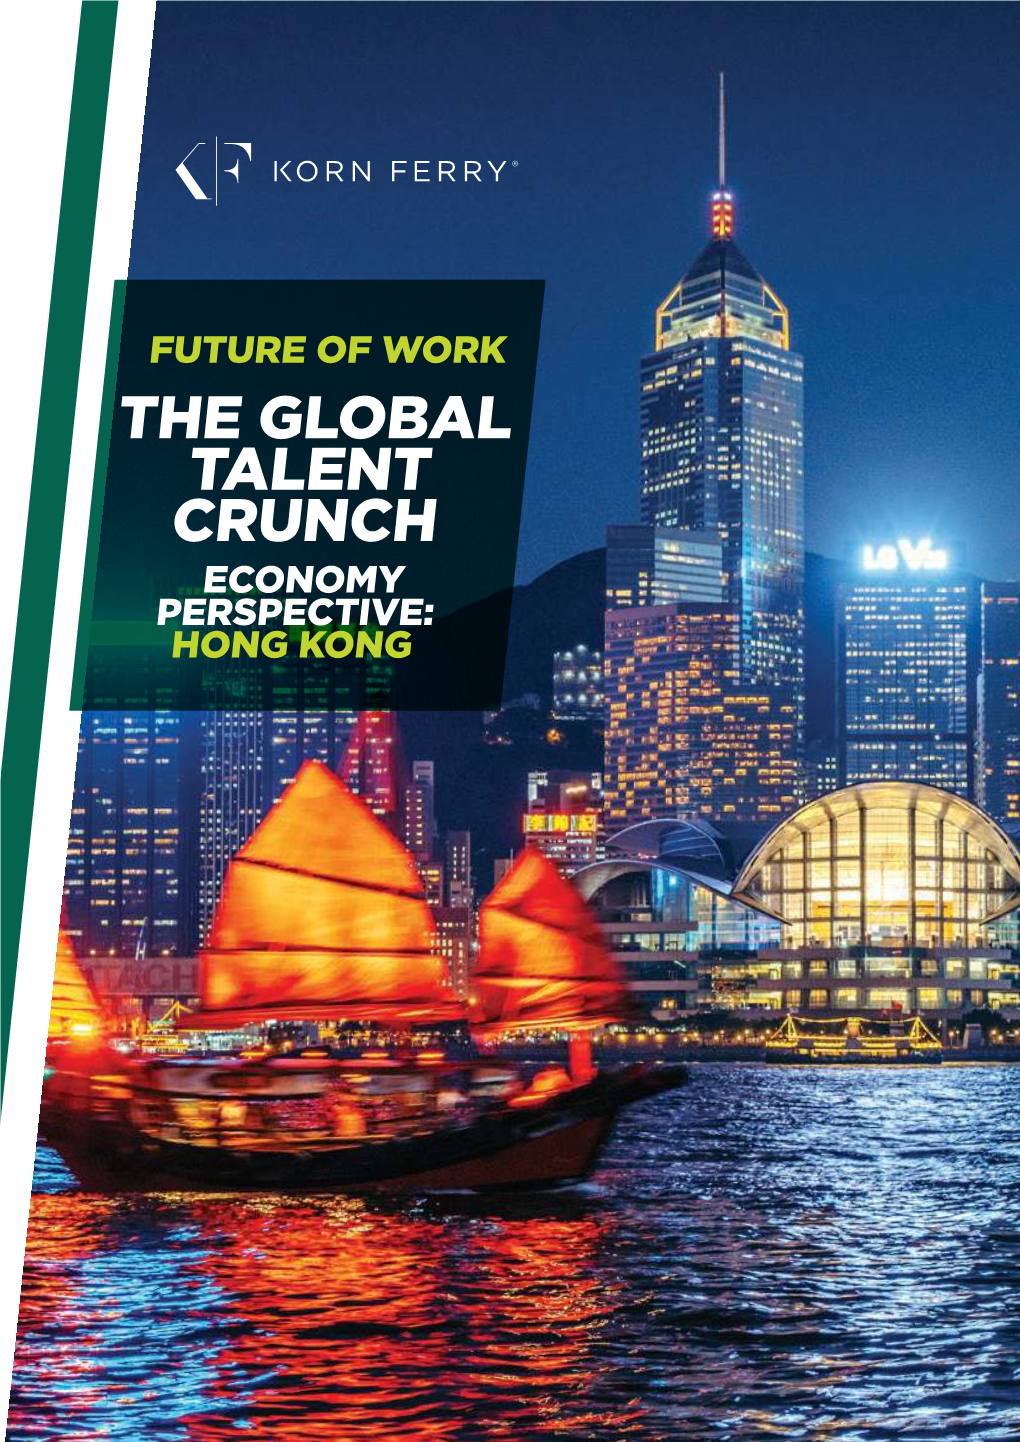 The Global Talent Crunch